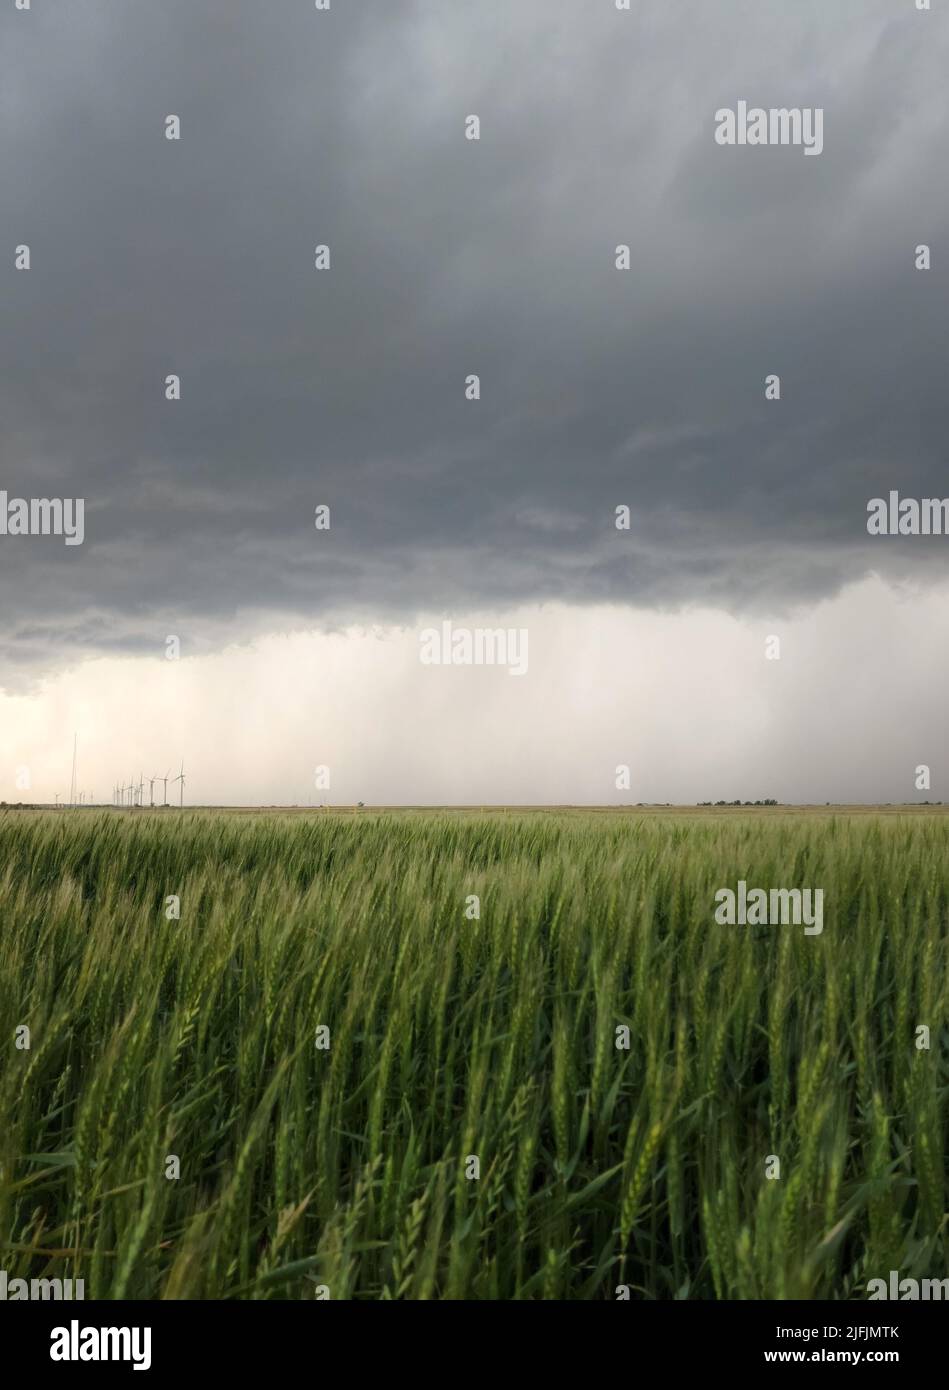 Gray storm clouds over a green crop of wheat. Photographed with a shallow depth of field. Image has copy space. Stock Photo